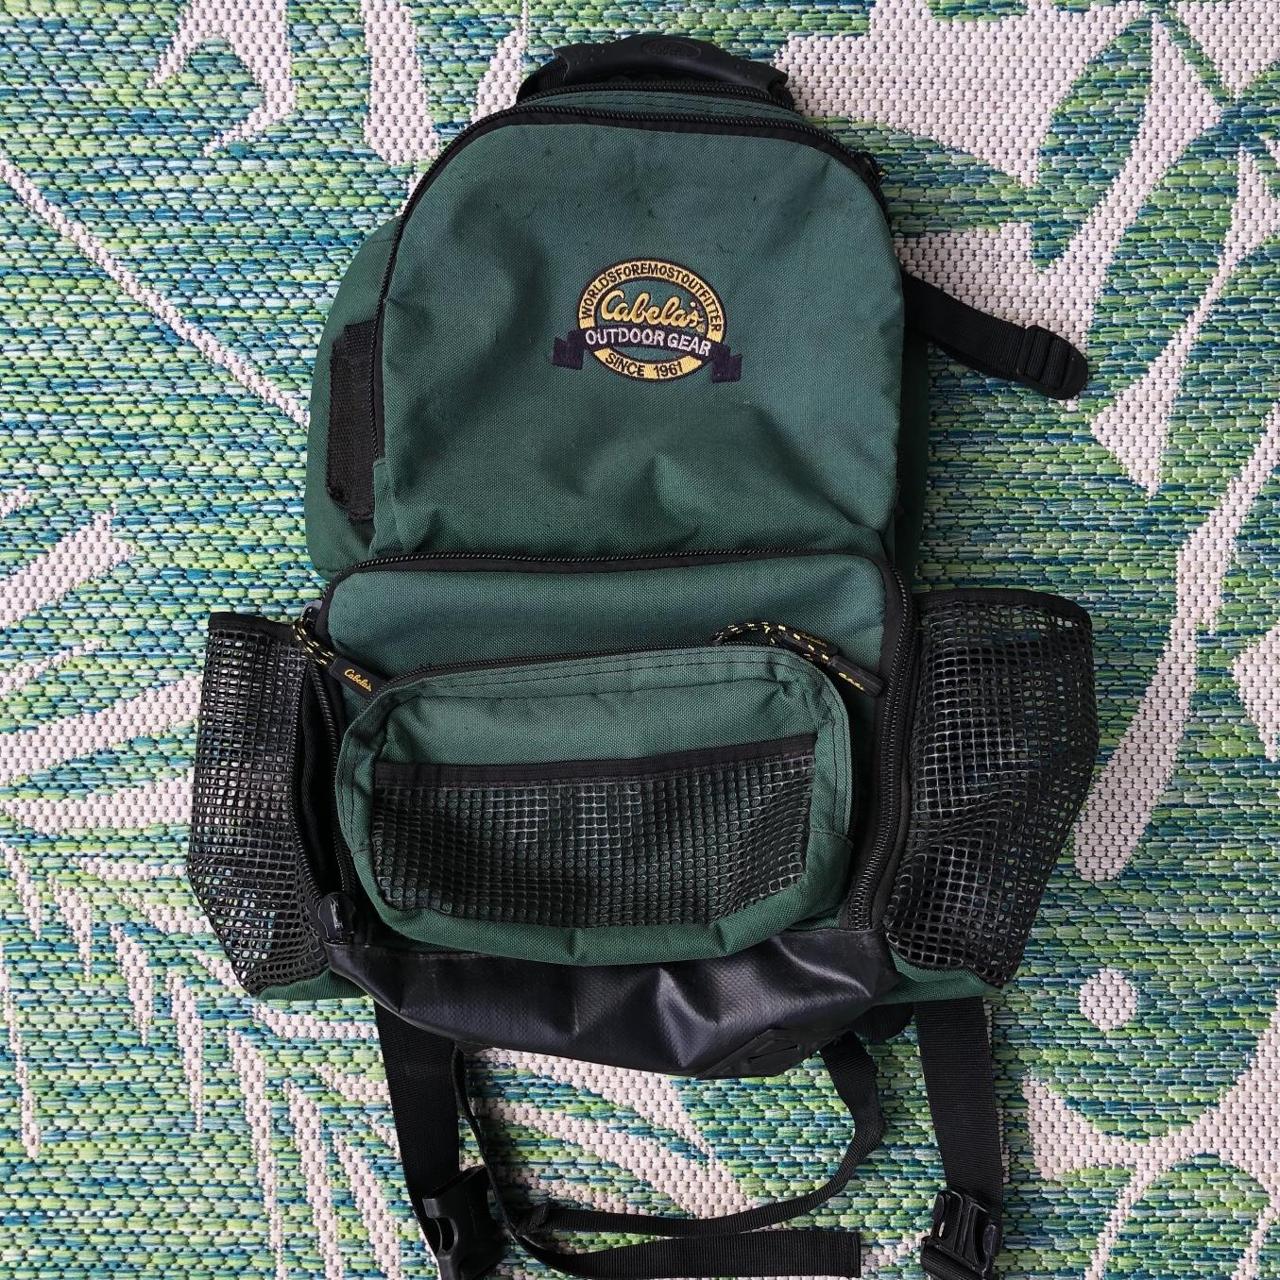 Cabelas Outdoor Backpack. It has 3 compartment.